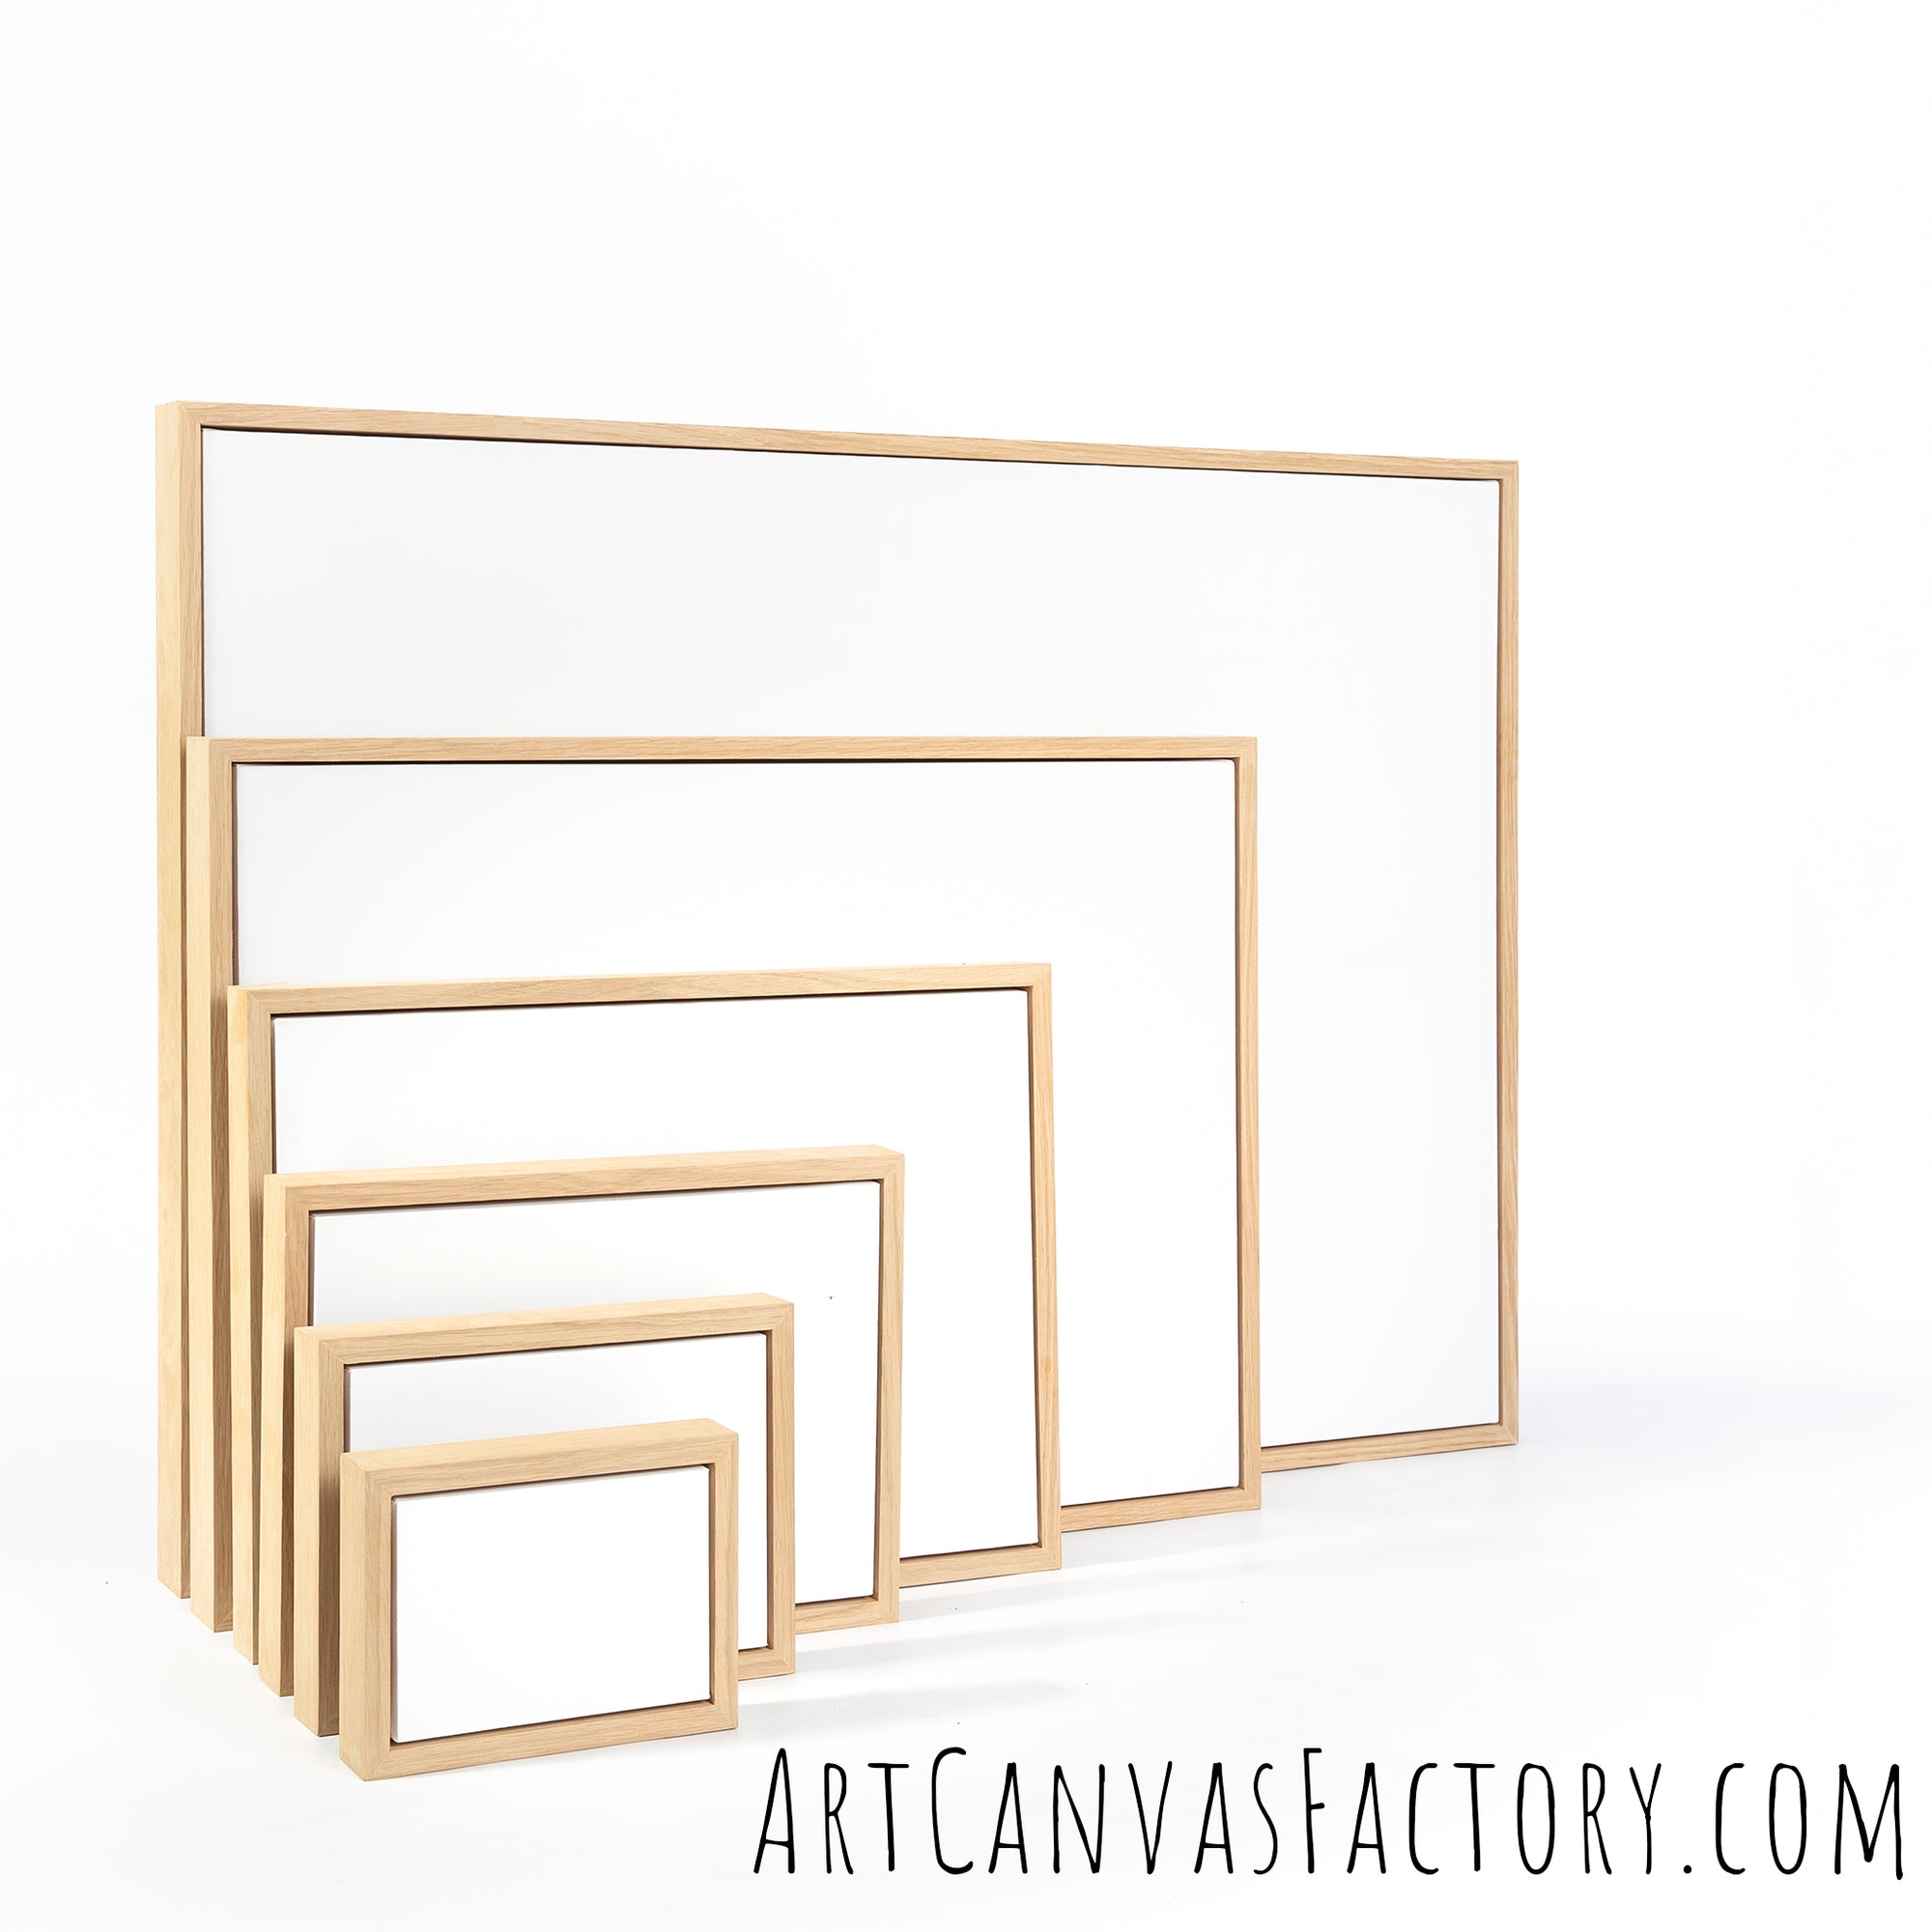 Buy 24x7 eMall 5 ft (152cm) Wooden Easel Canvas Holder Display